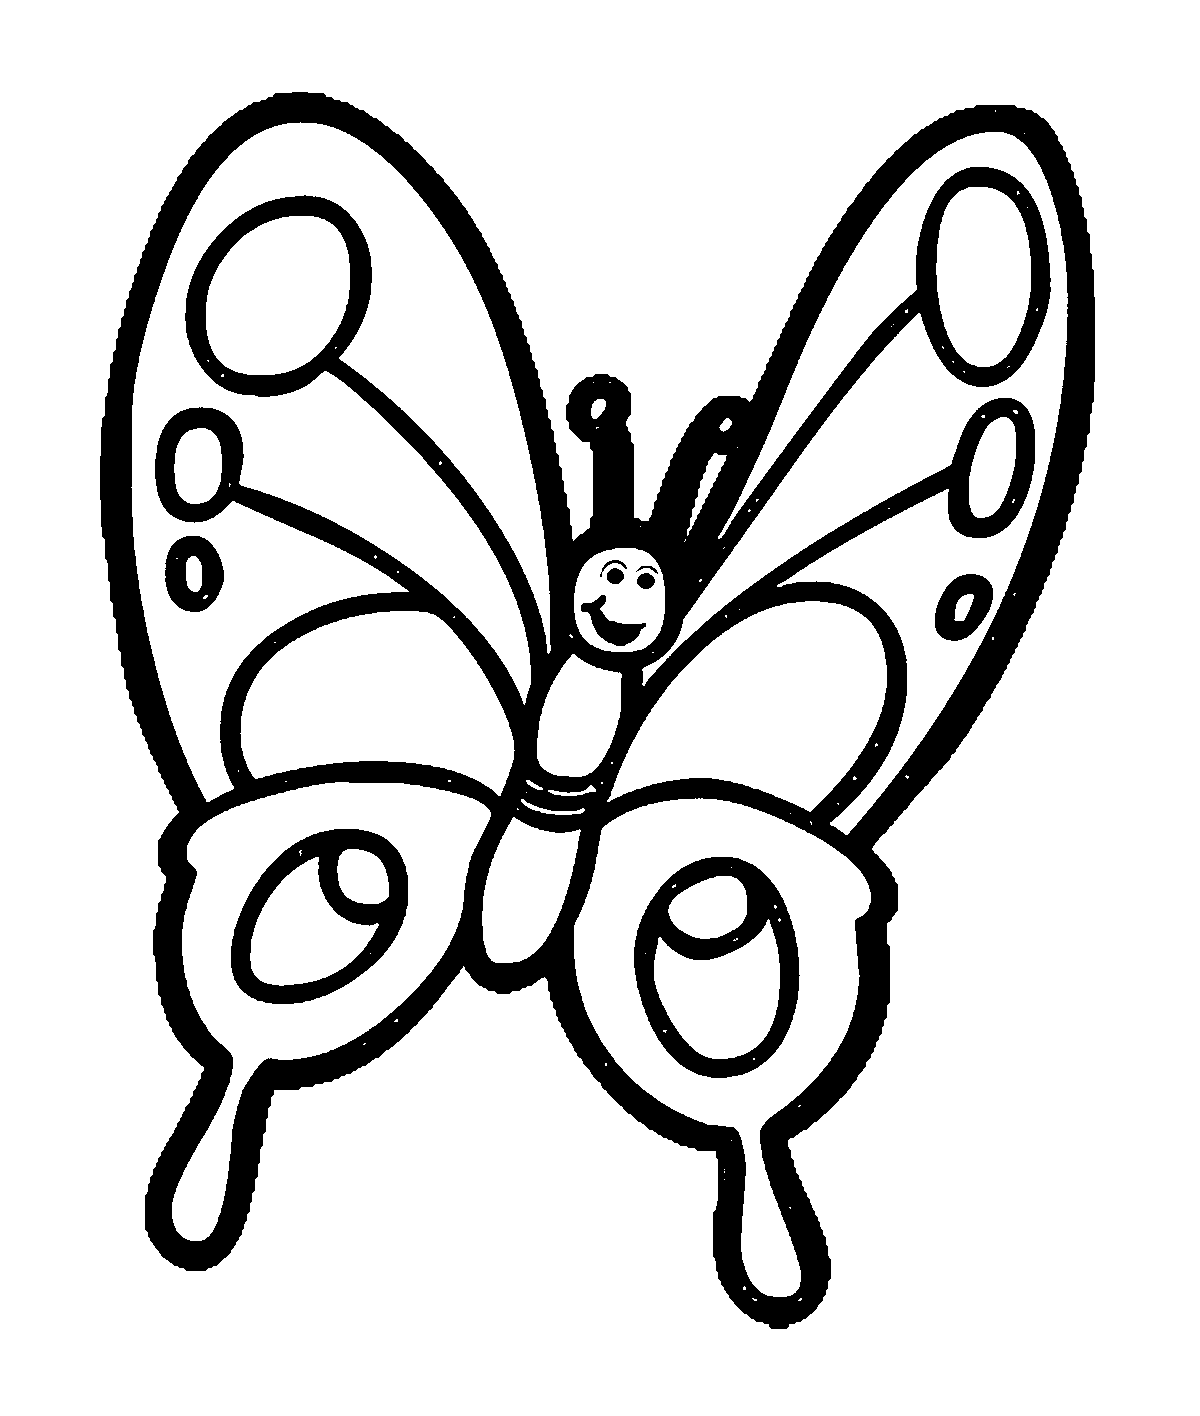 Clipart designs black and white. Butterfly drawing at getdrawings